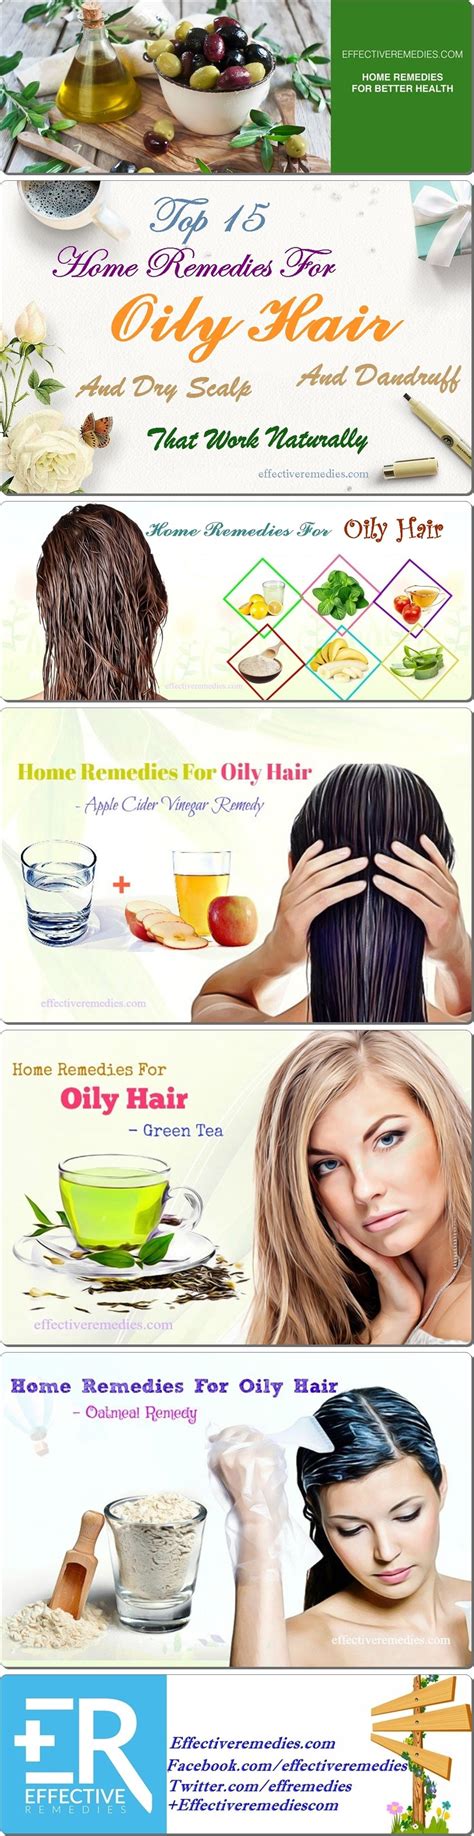 Top 17 Home Remedies For Oily Hair Dry Scalp And Dandruff That Work